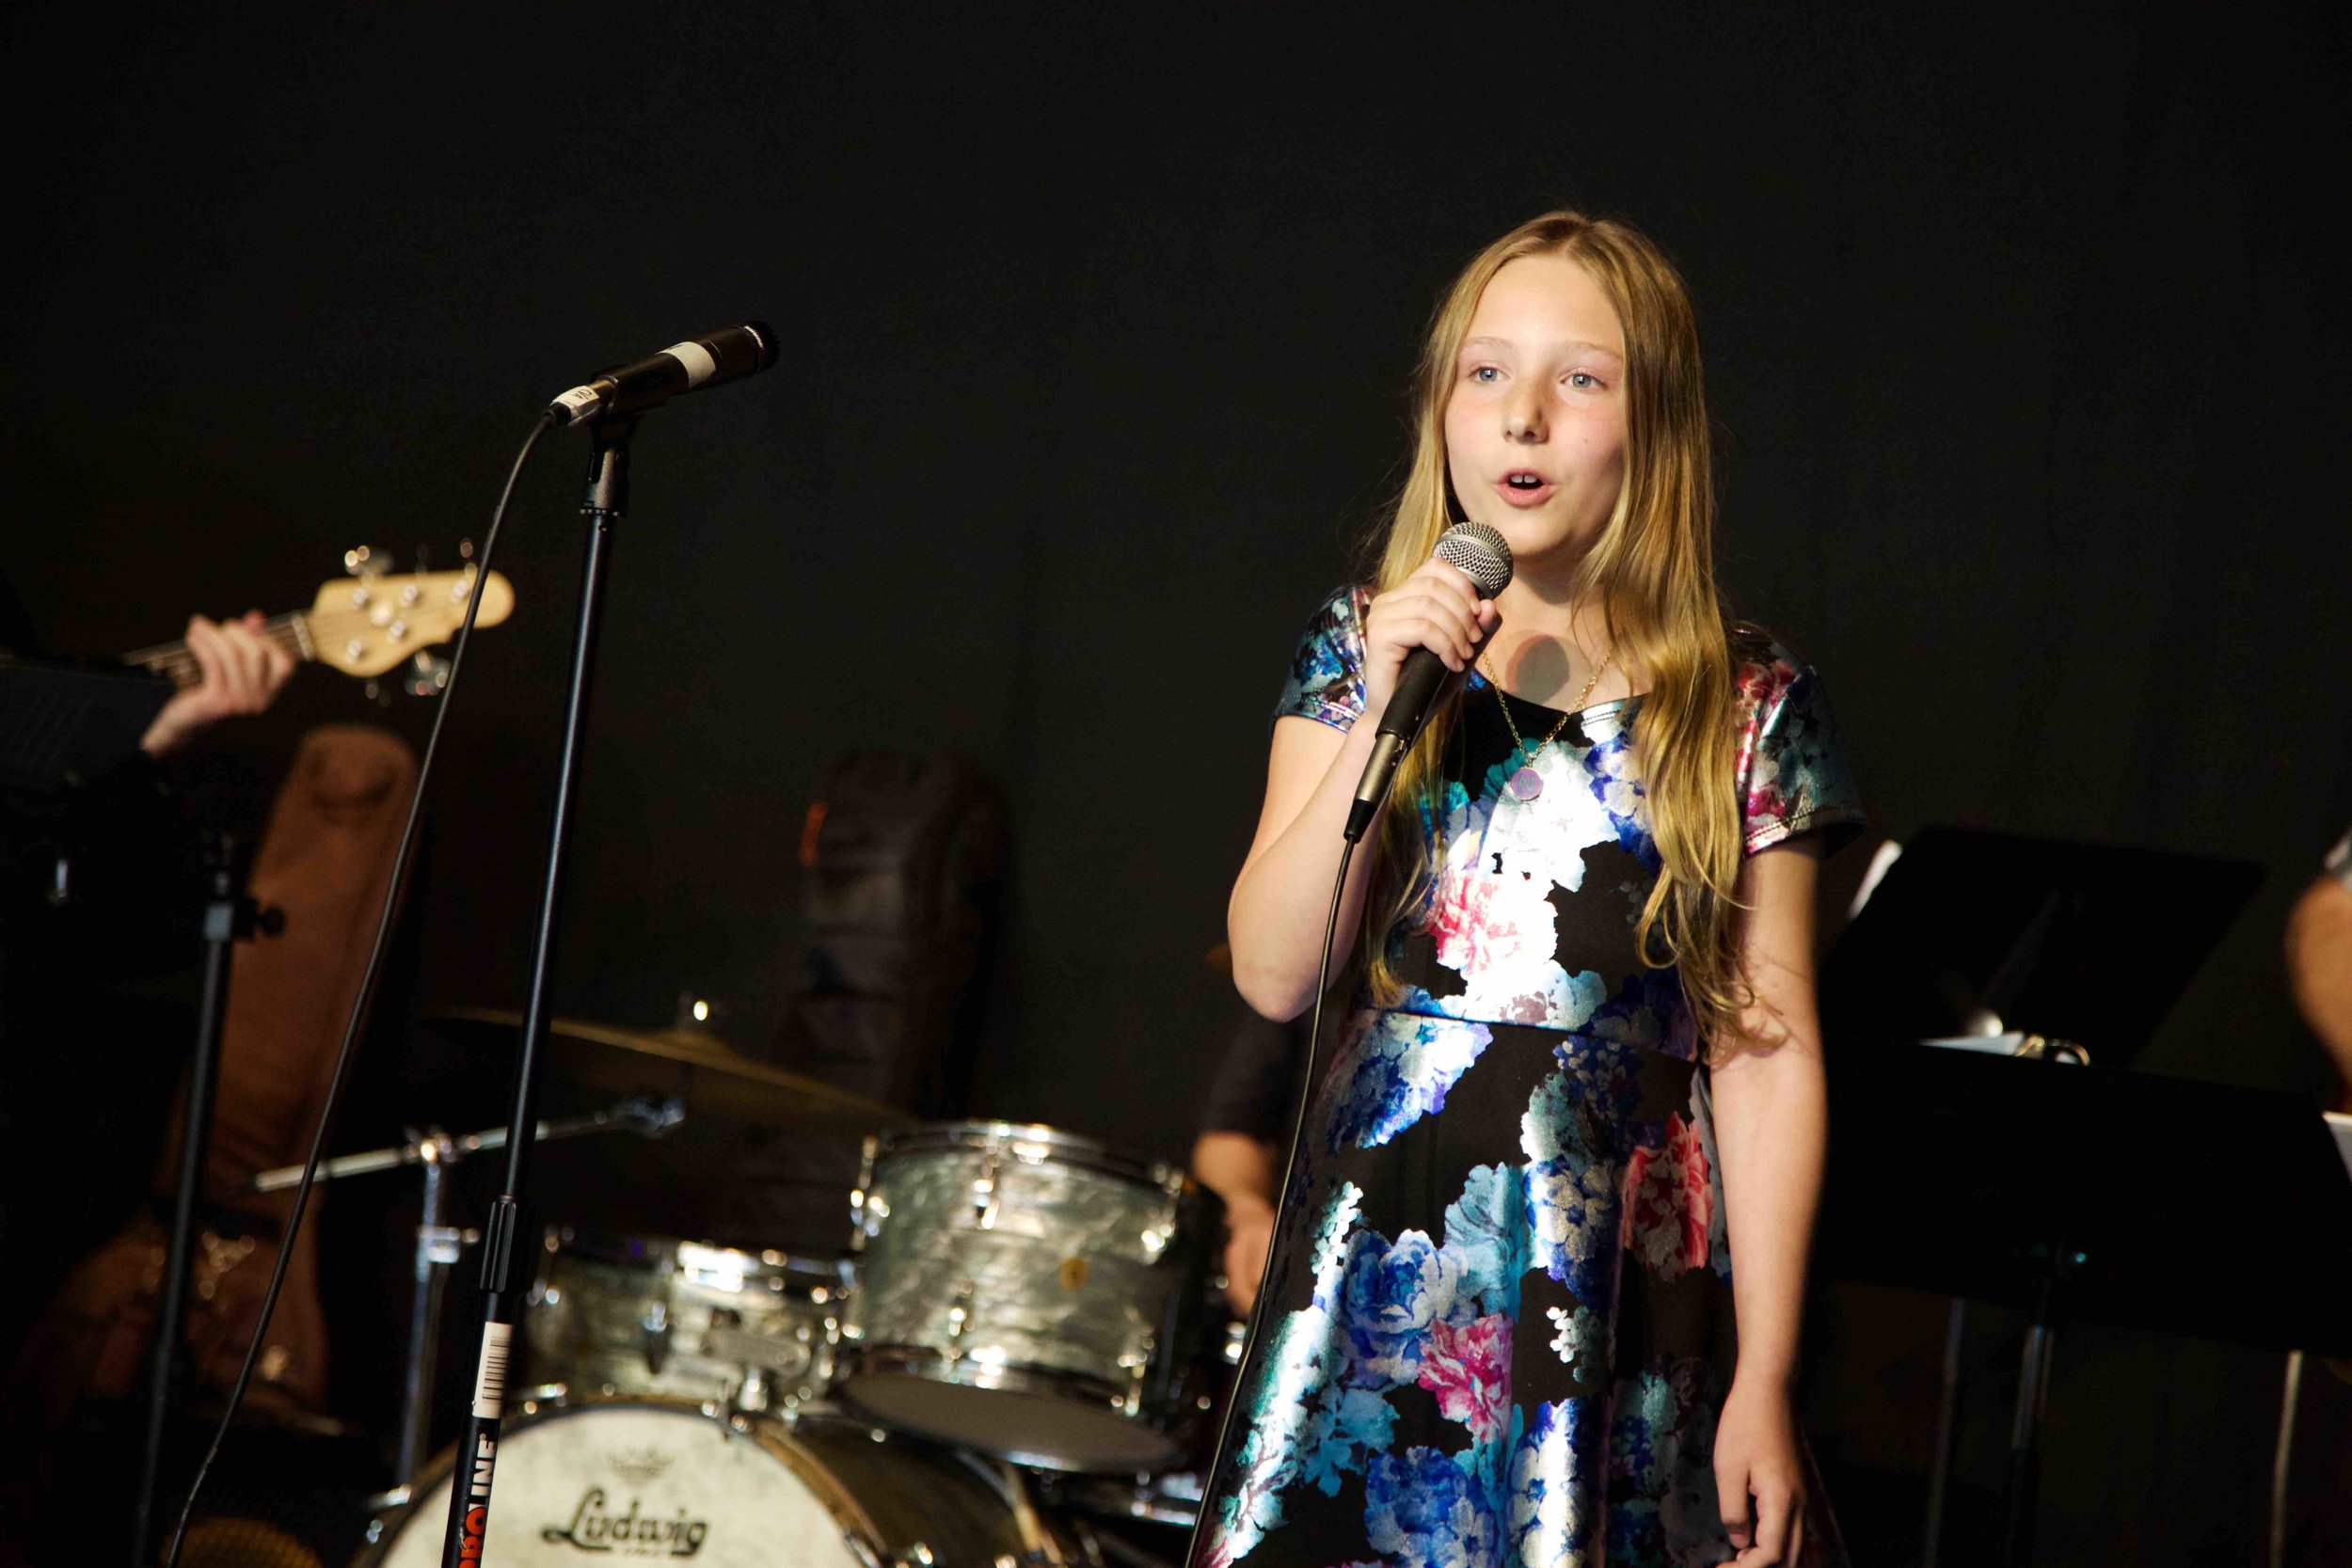 Sammamish singing lessons for kids, teens, and adults at Cascade Voice Academy (formerly Issaquah Voice Studio)